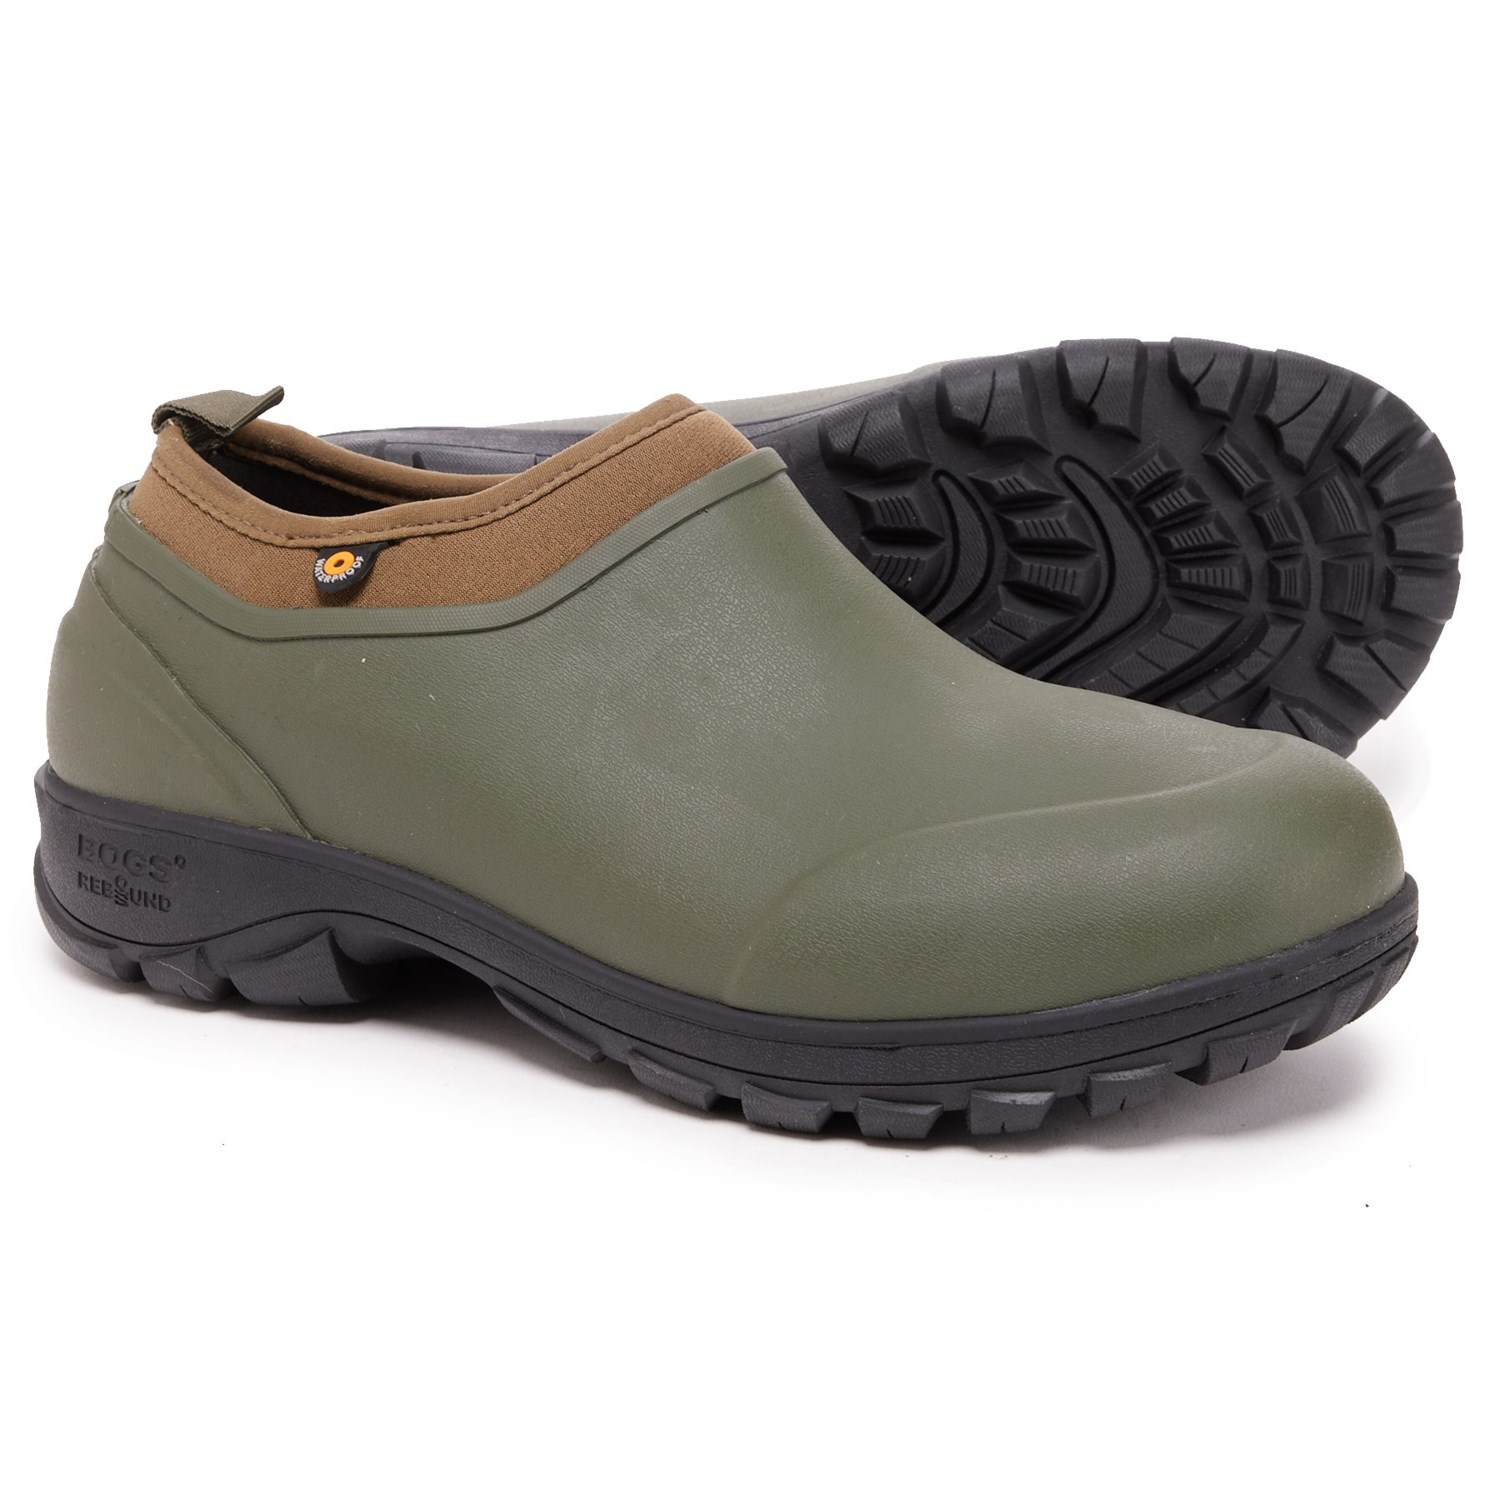 Bogs Footwear Sauvie Shoes (For Men) - Save 33%